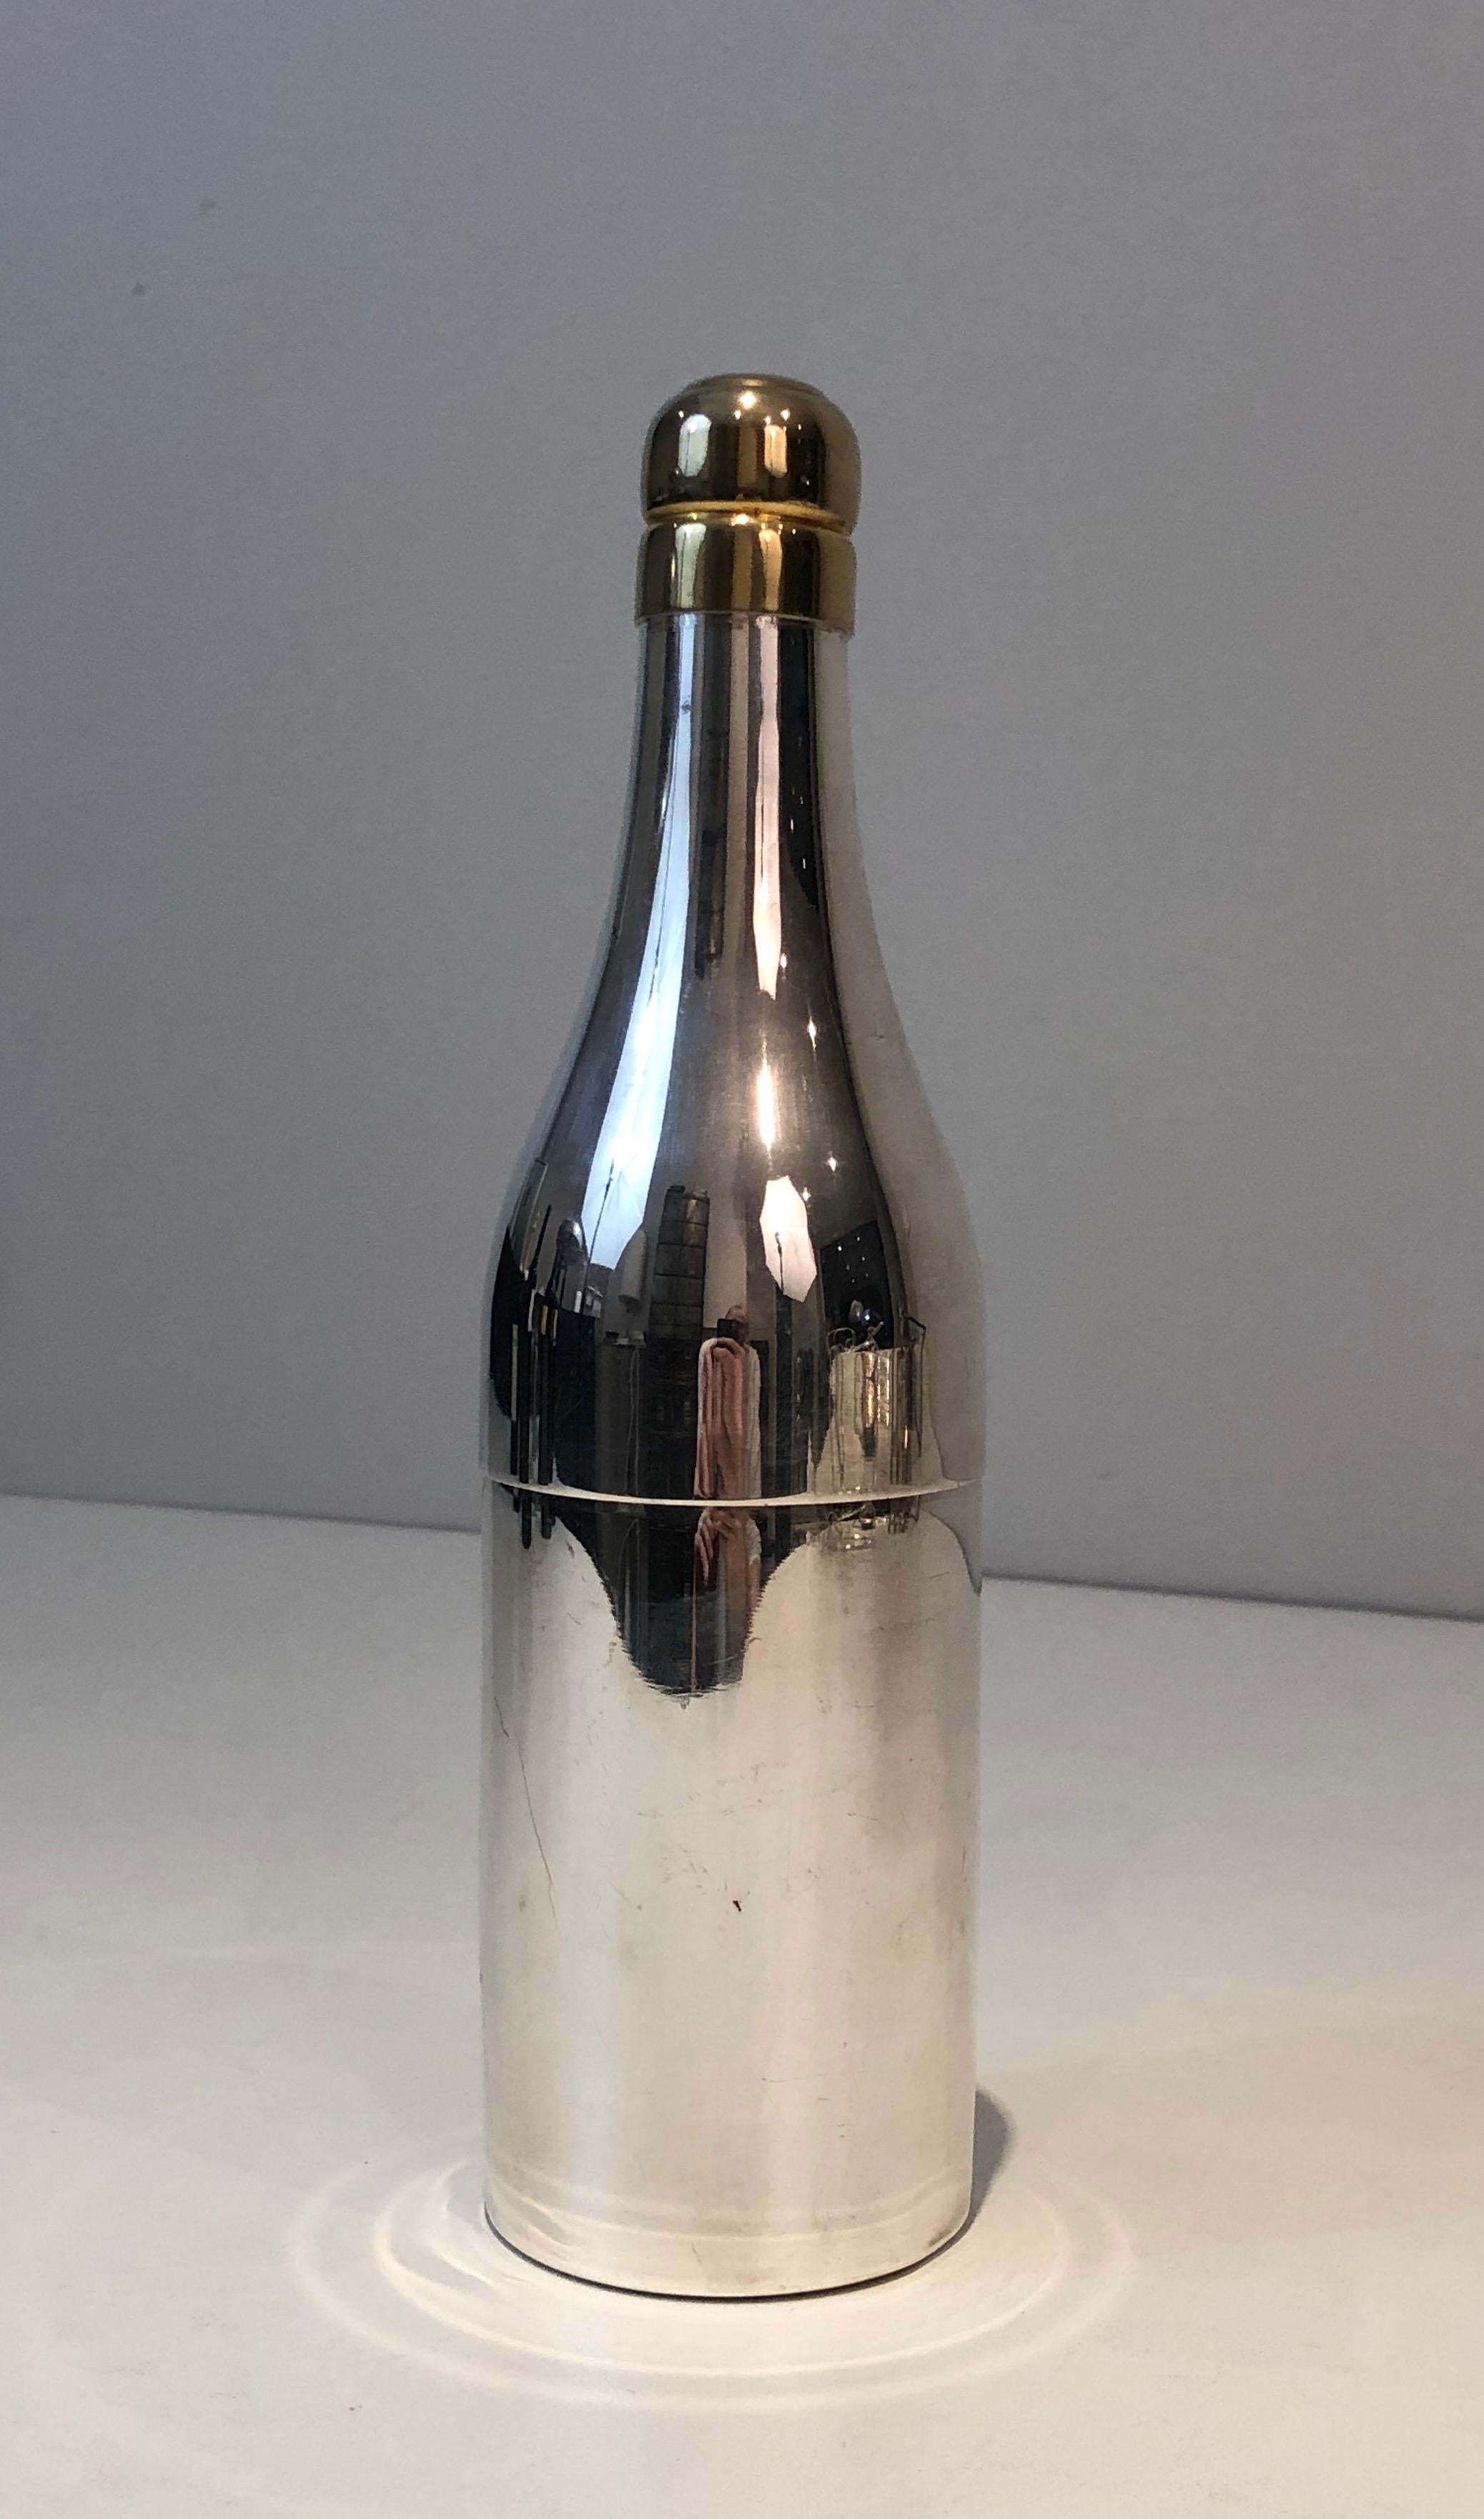 This rare silver plated shaker is presenting a Champagne bottle. This is a French work, circa 1930.